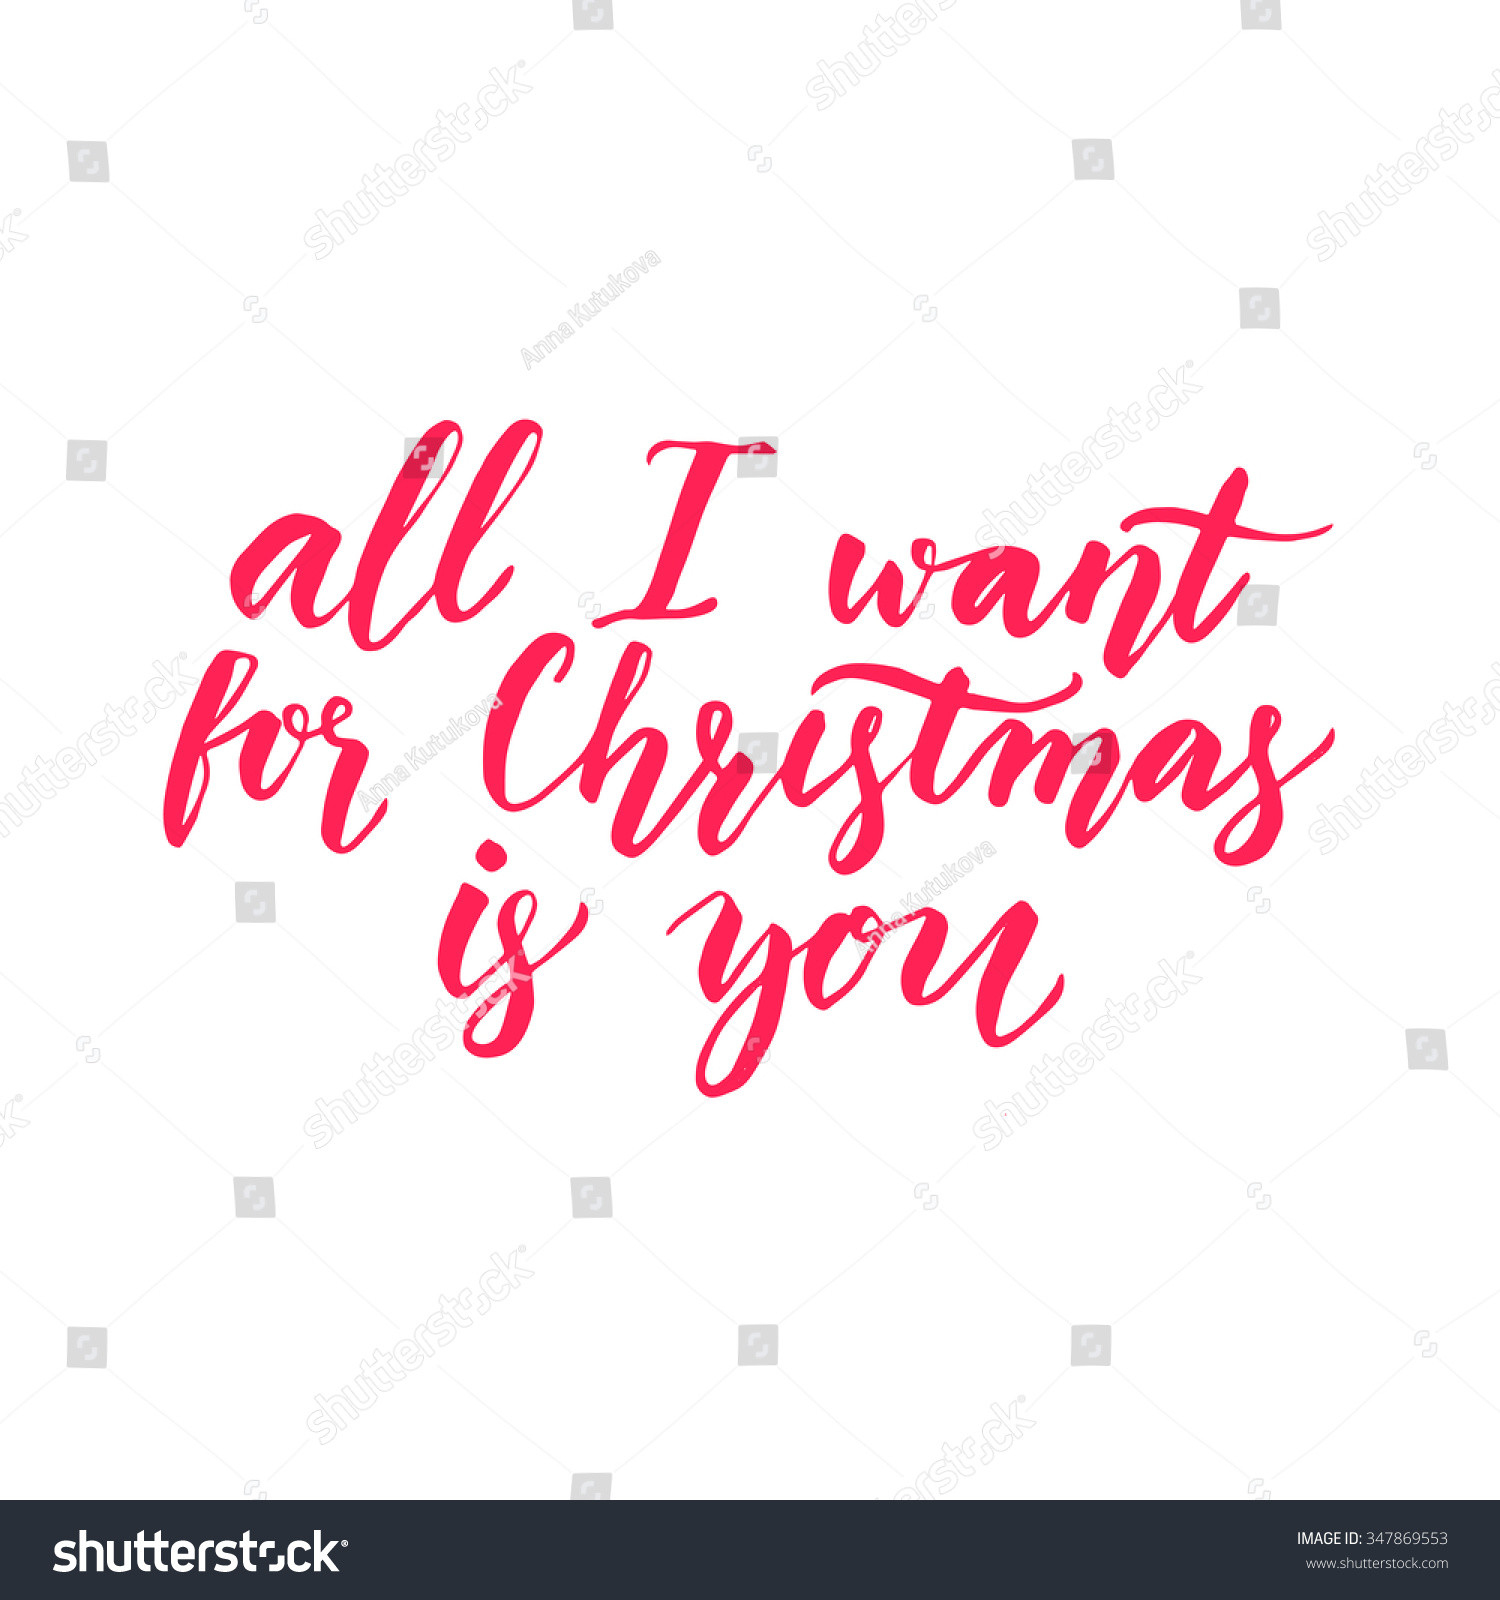 All I Want For Christmas Is You Quotes
 All I Want For Christmas Is You Inspirational Quote For